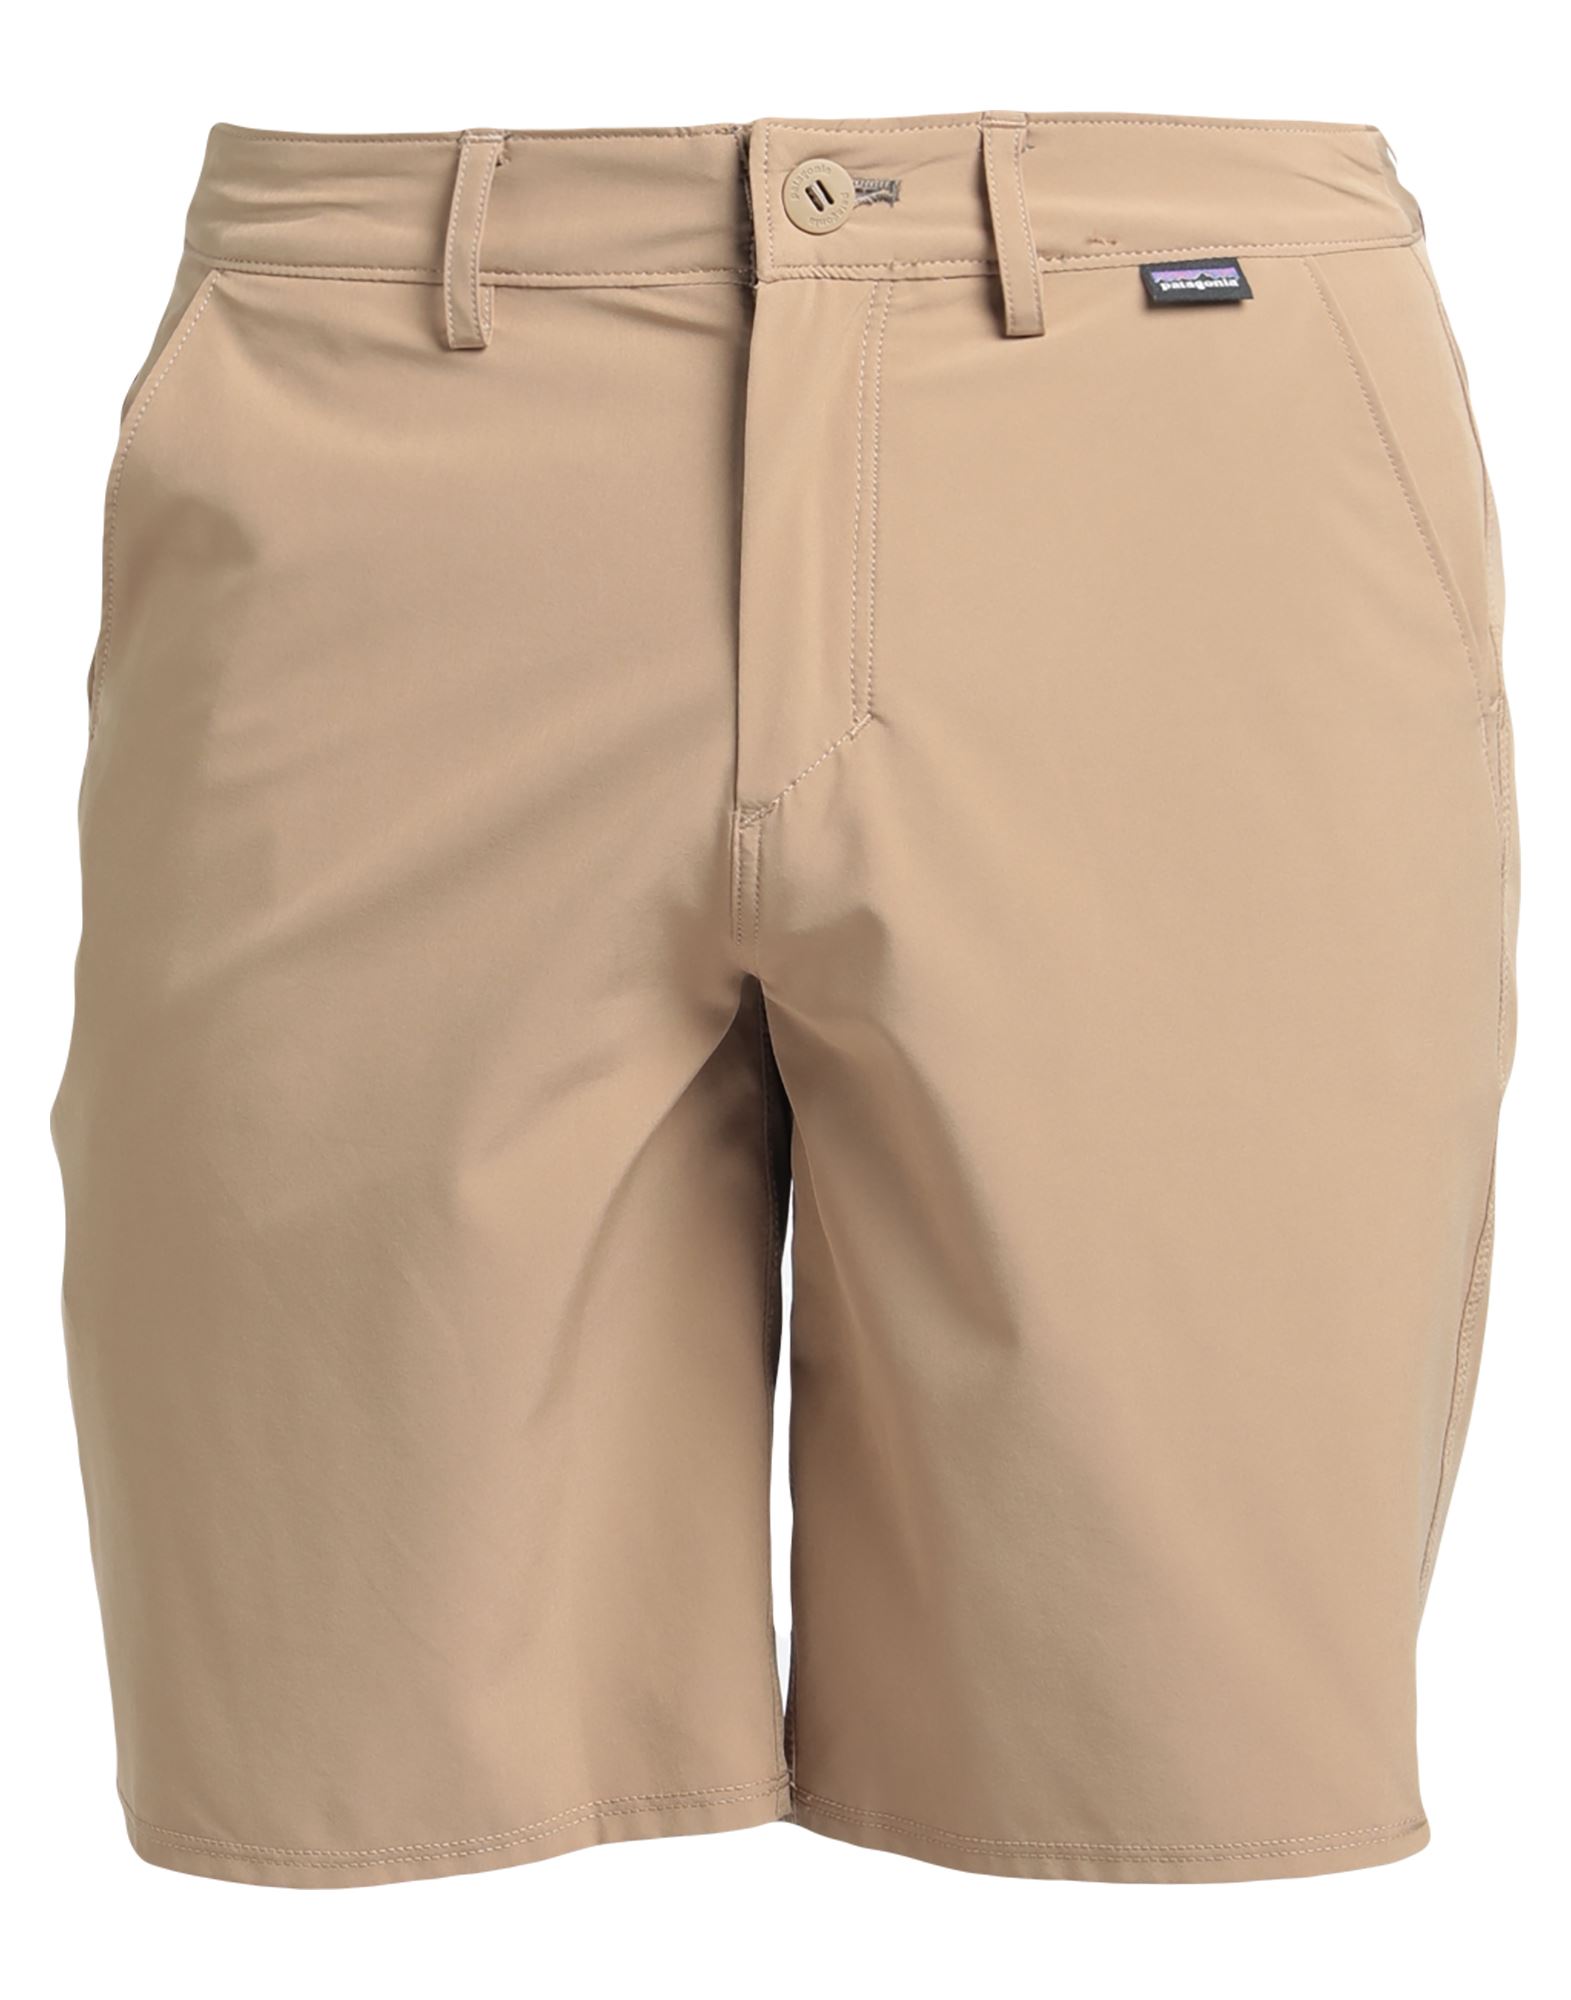 Patagonia Beach Shorts And Pants In Beige